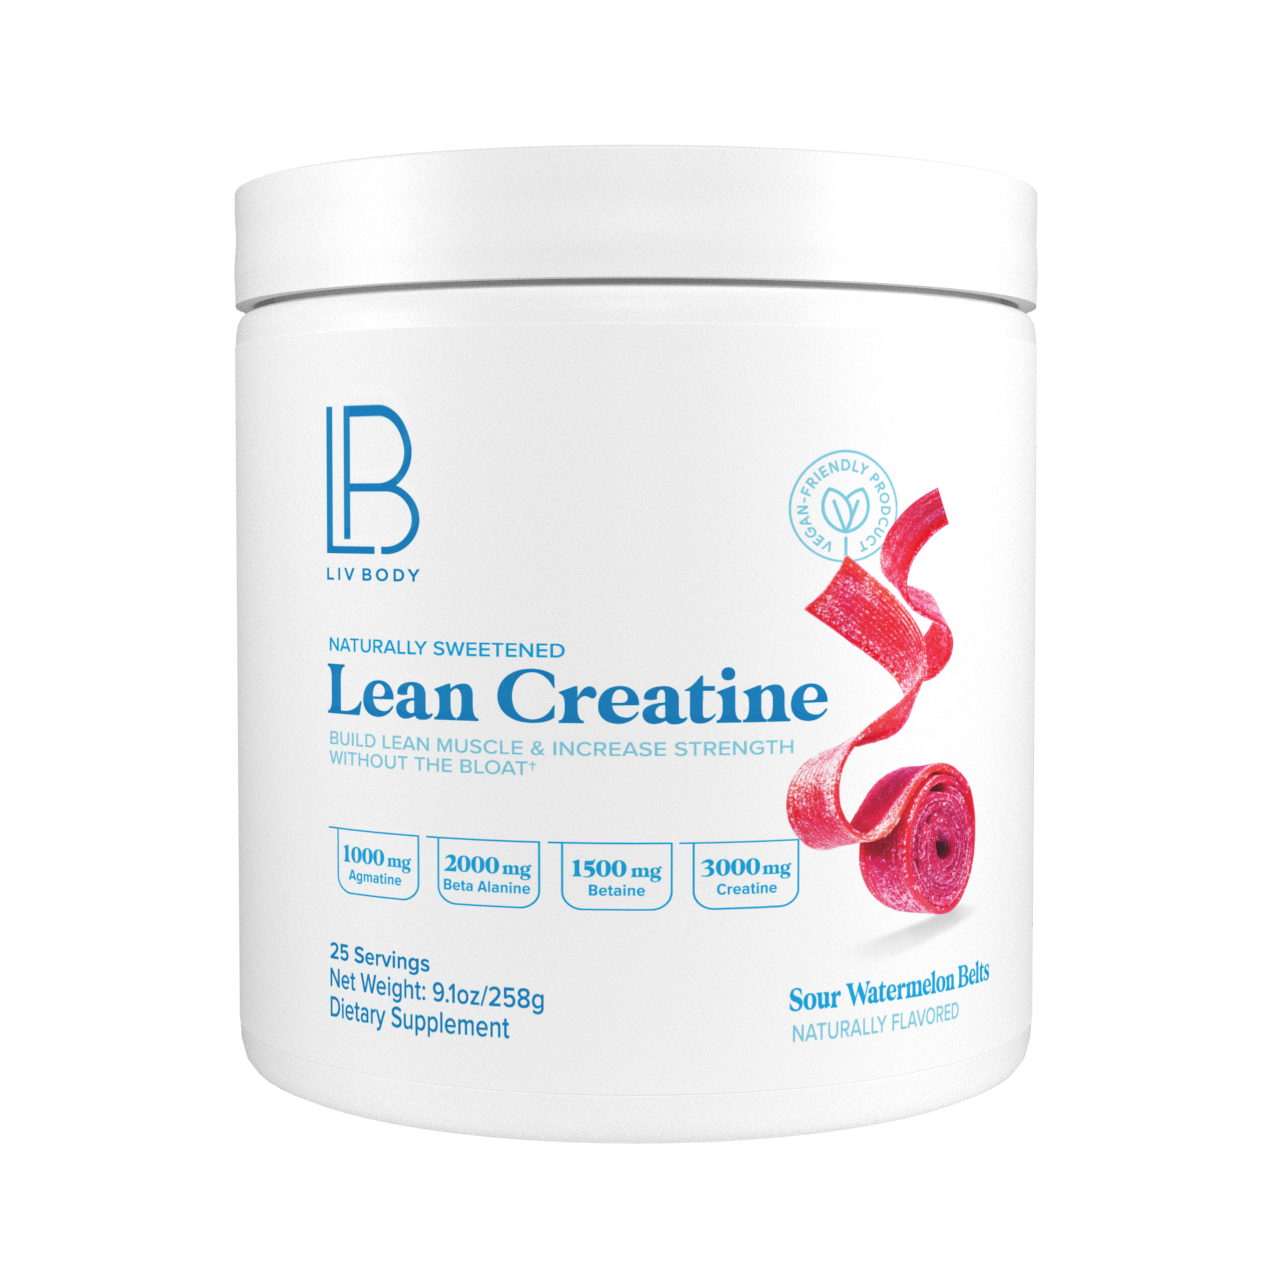 Image of LIV Body's Lean Creatine product.